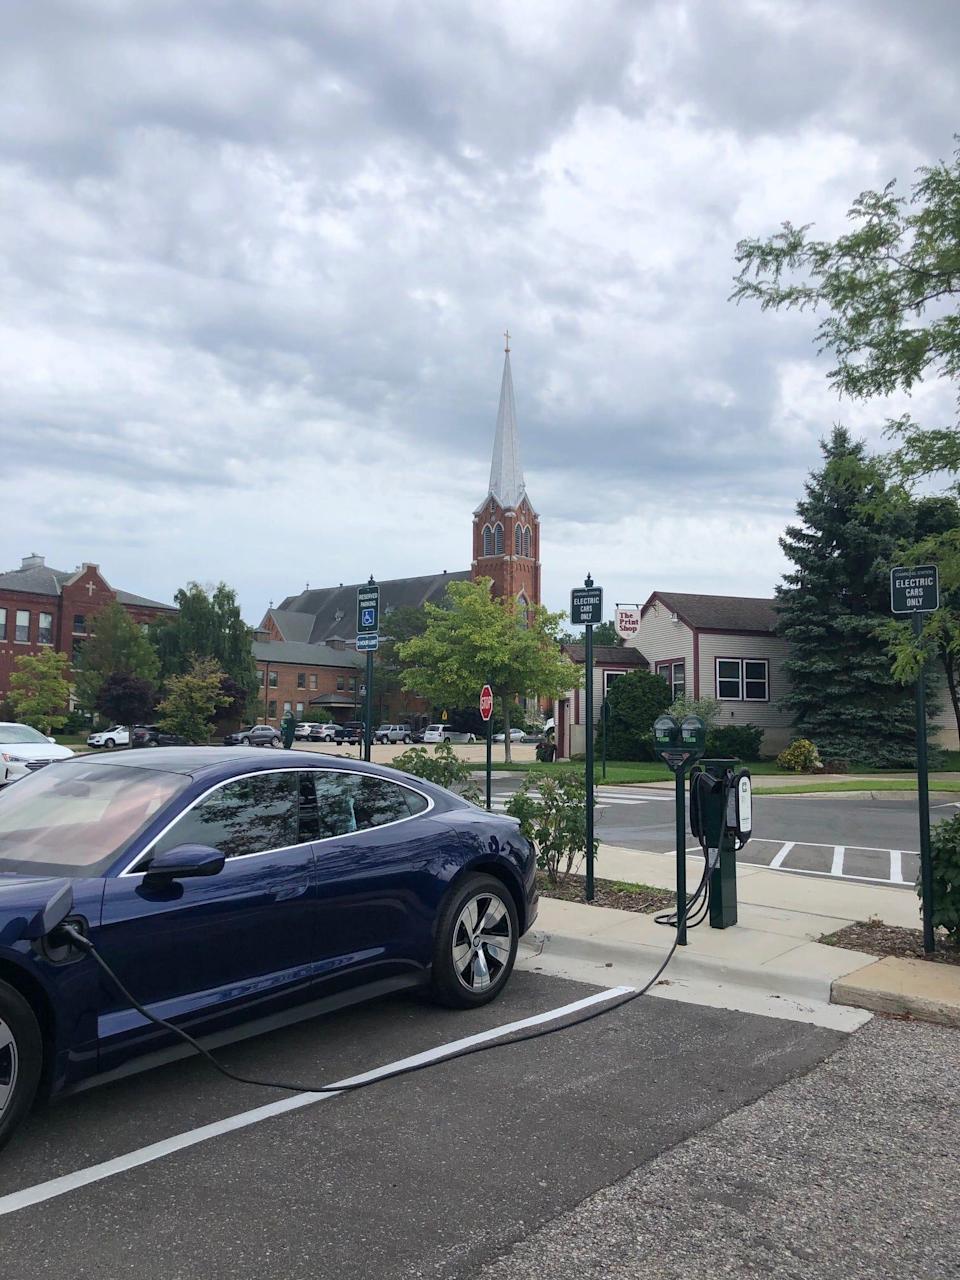 Patrick Anderson, CEO of Anderson Consulting, drove from his home in East Lansing to Petoskey in his EV. Here he charges his car for an entire day in July 2020 at a public charger in Petoskey.